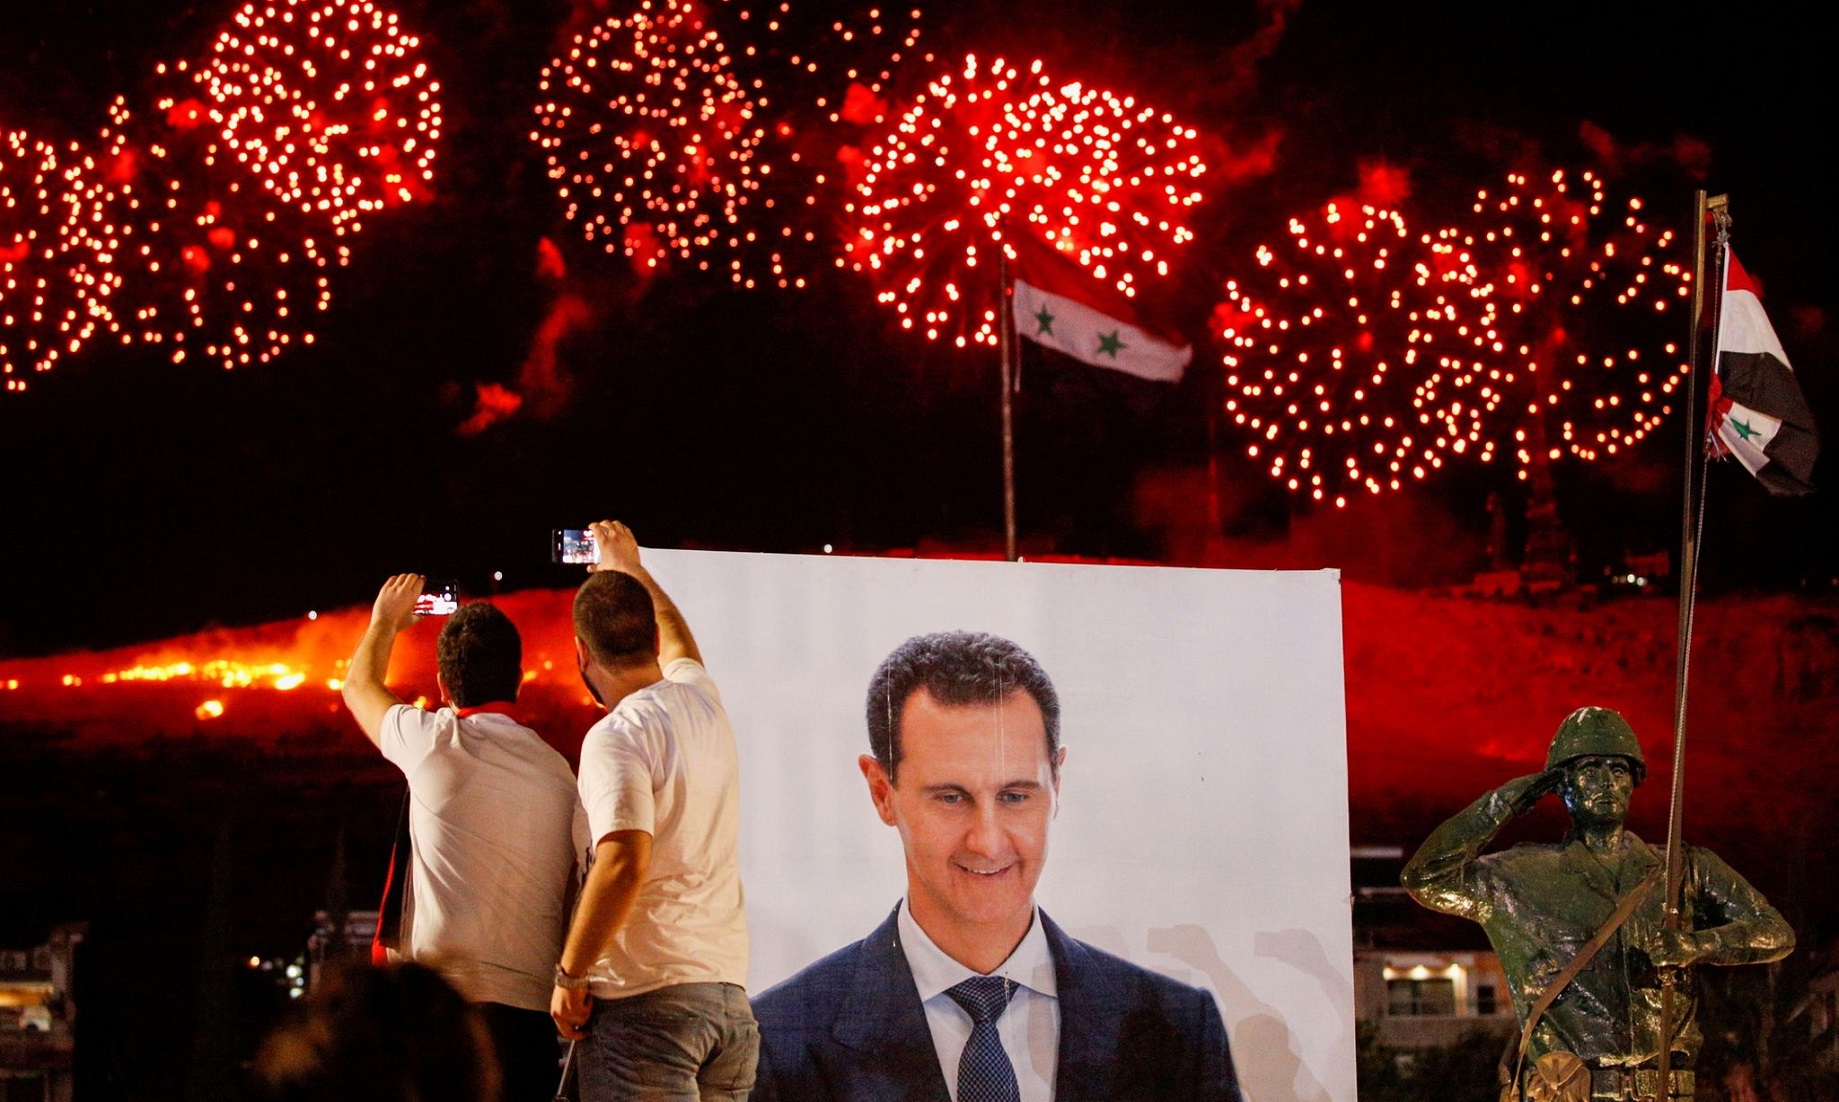 Syria’s Assad Says Winning Presidential Election “Slap In Faces Of Enemies”